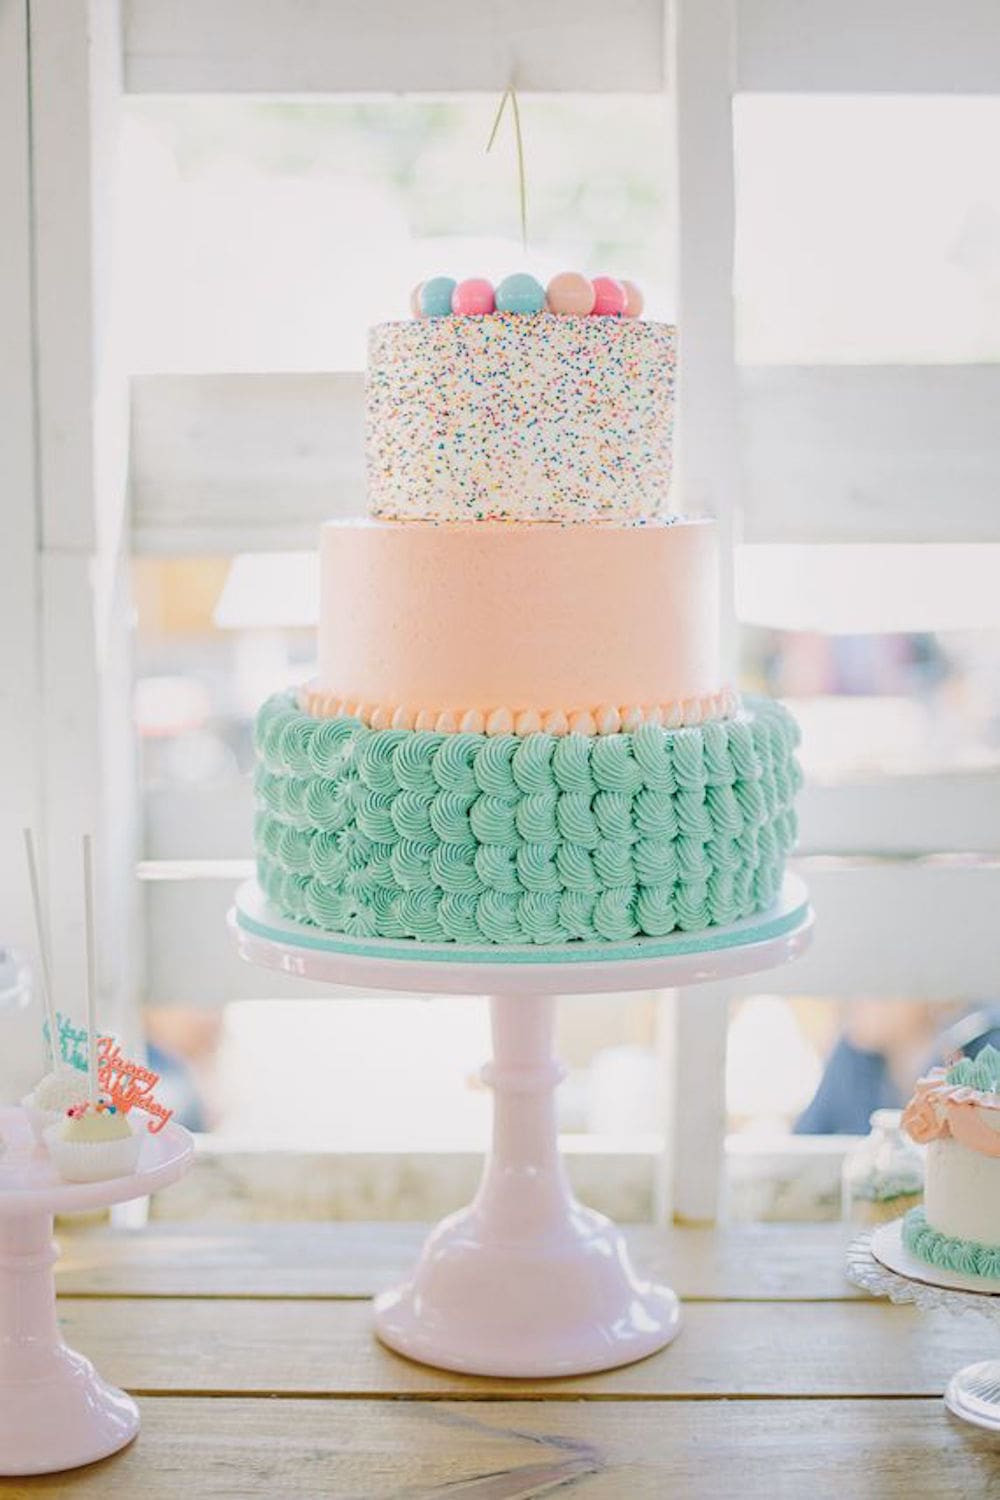 Pinterest Birthday Cakes
 5 WAYS TO THROW AN ADORABLE COLORFUL KIDS PARTY